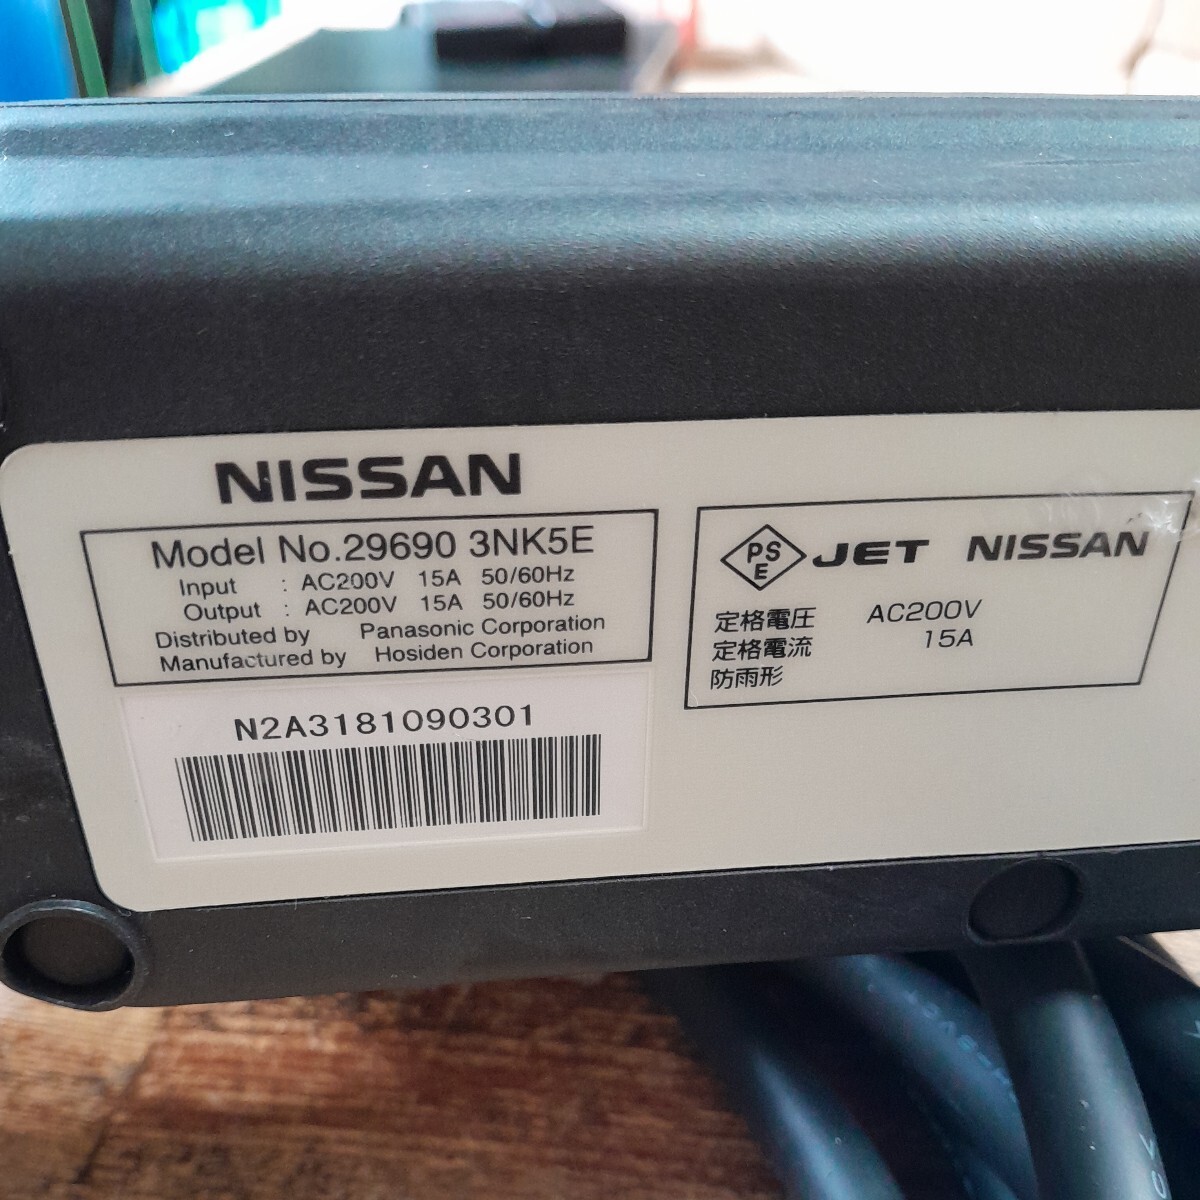 ( control number 23051376) Nissan leaf charge cable 29690 3NK5E AZEO for approximately 7.5m 200V superior article 2017 year made outright sales 